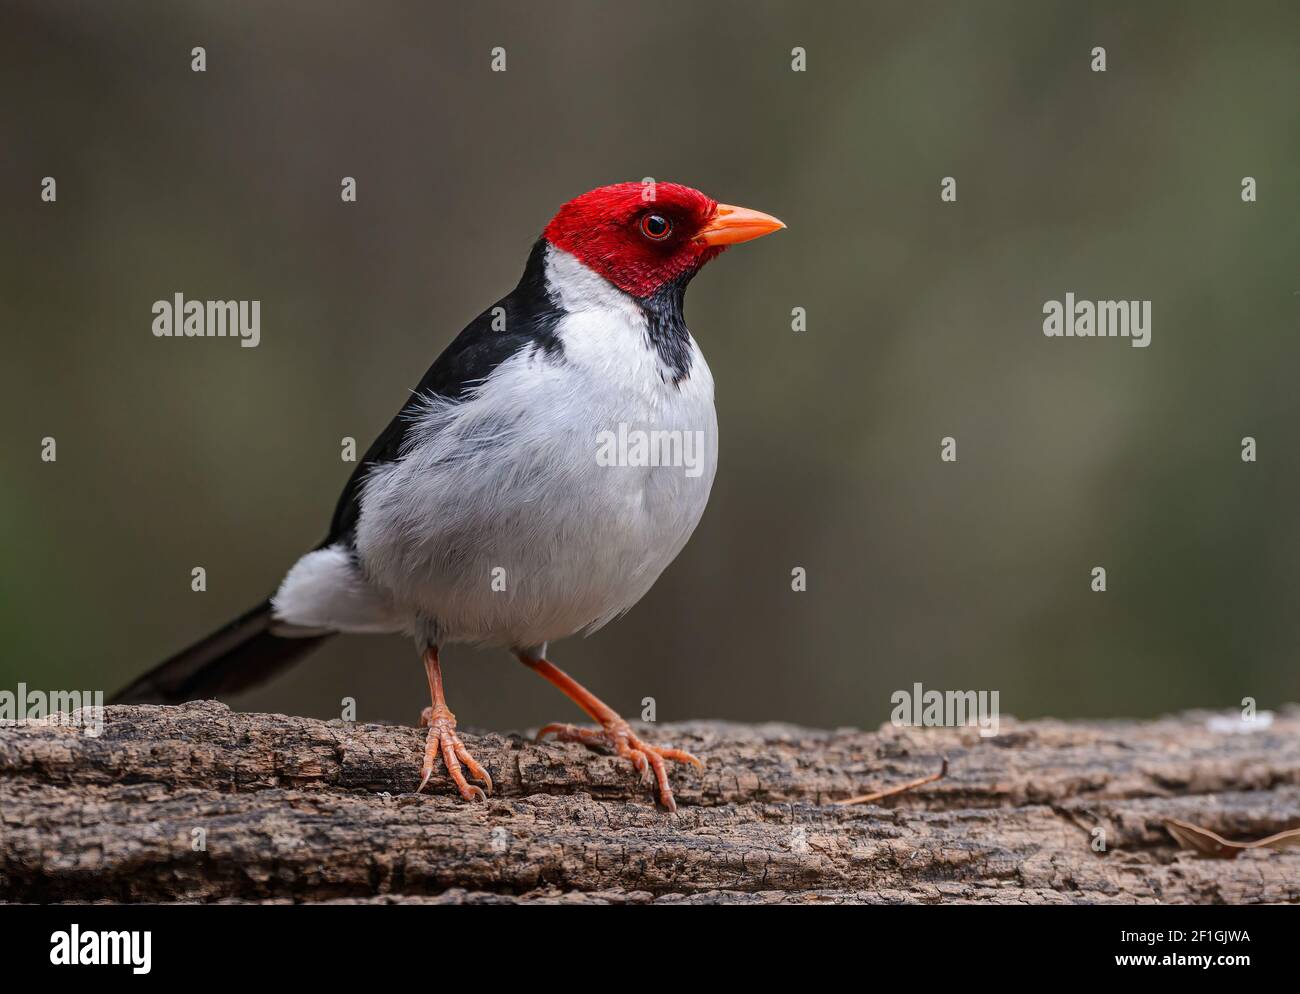 Red-capped Cardinal (Paroaria gularis) perched on log with soft green background Stock Photo